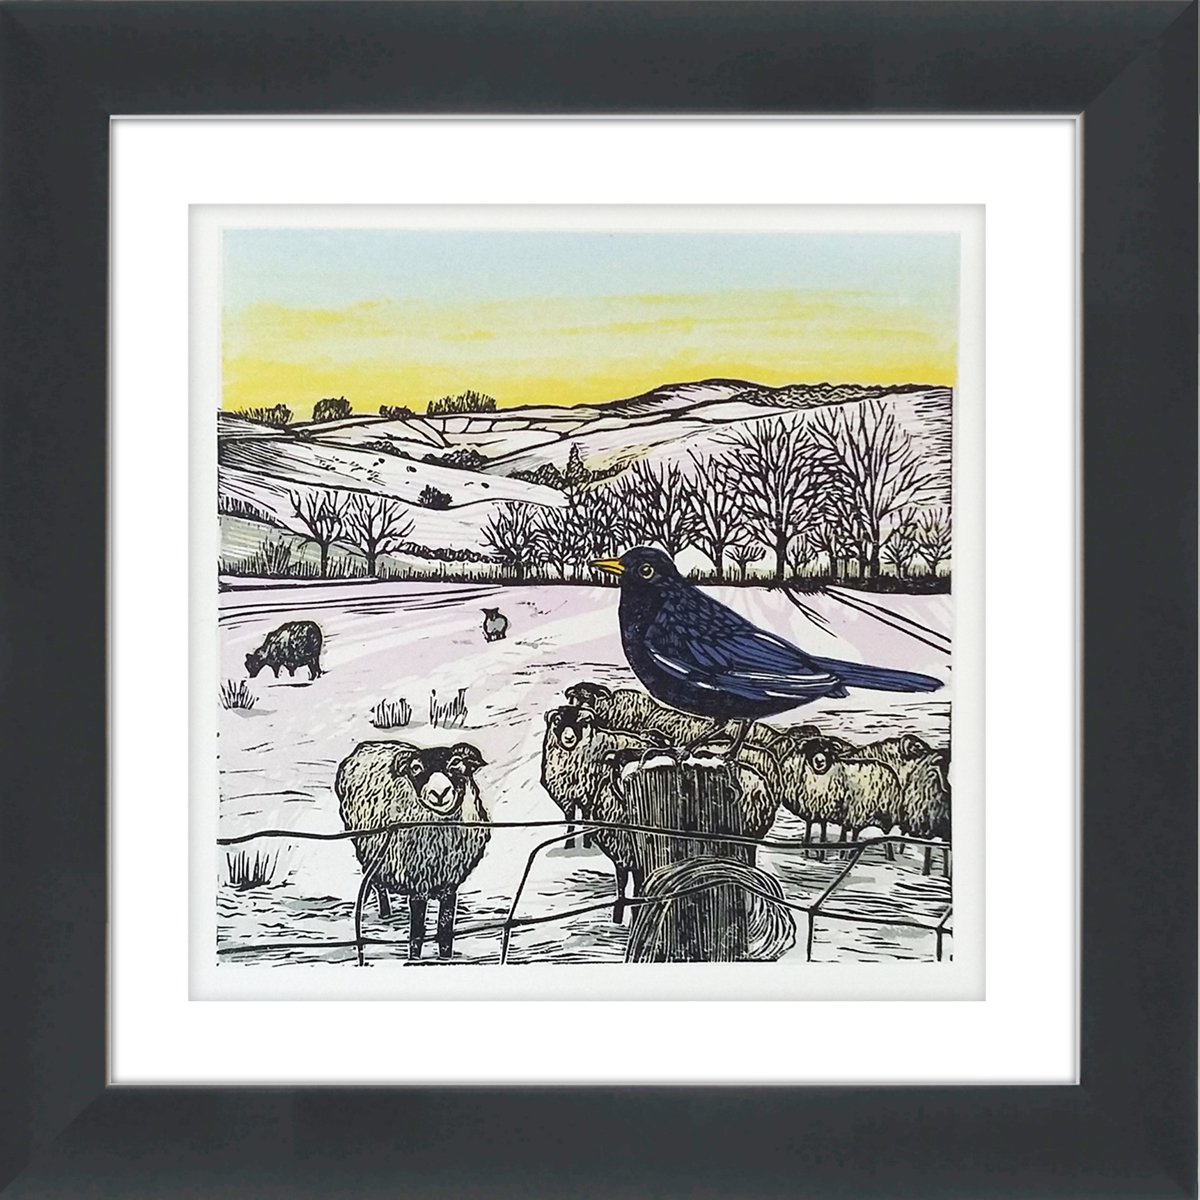 Evensong - Ready to hang, framed linoprint by Carolynne Coulson